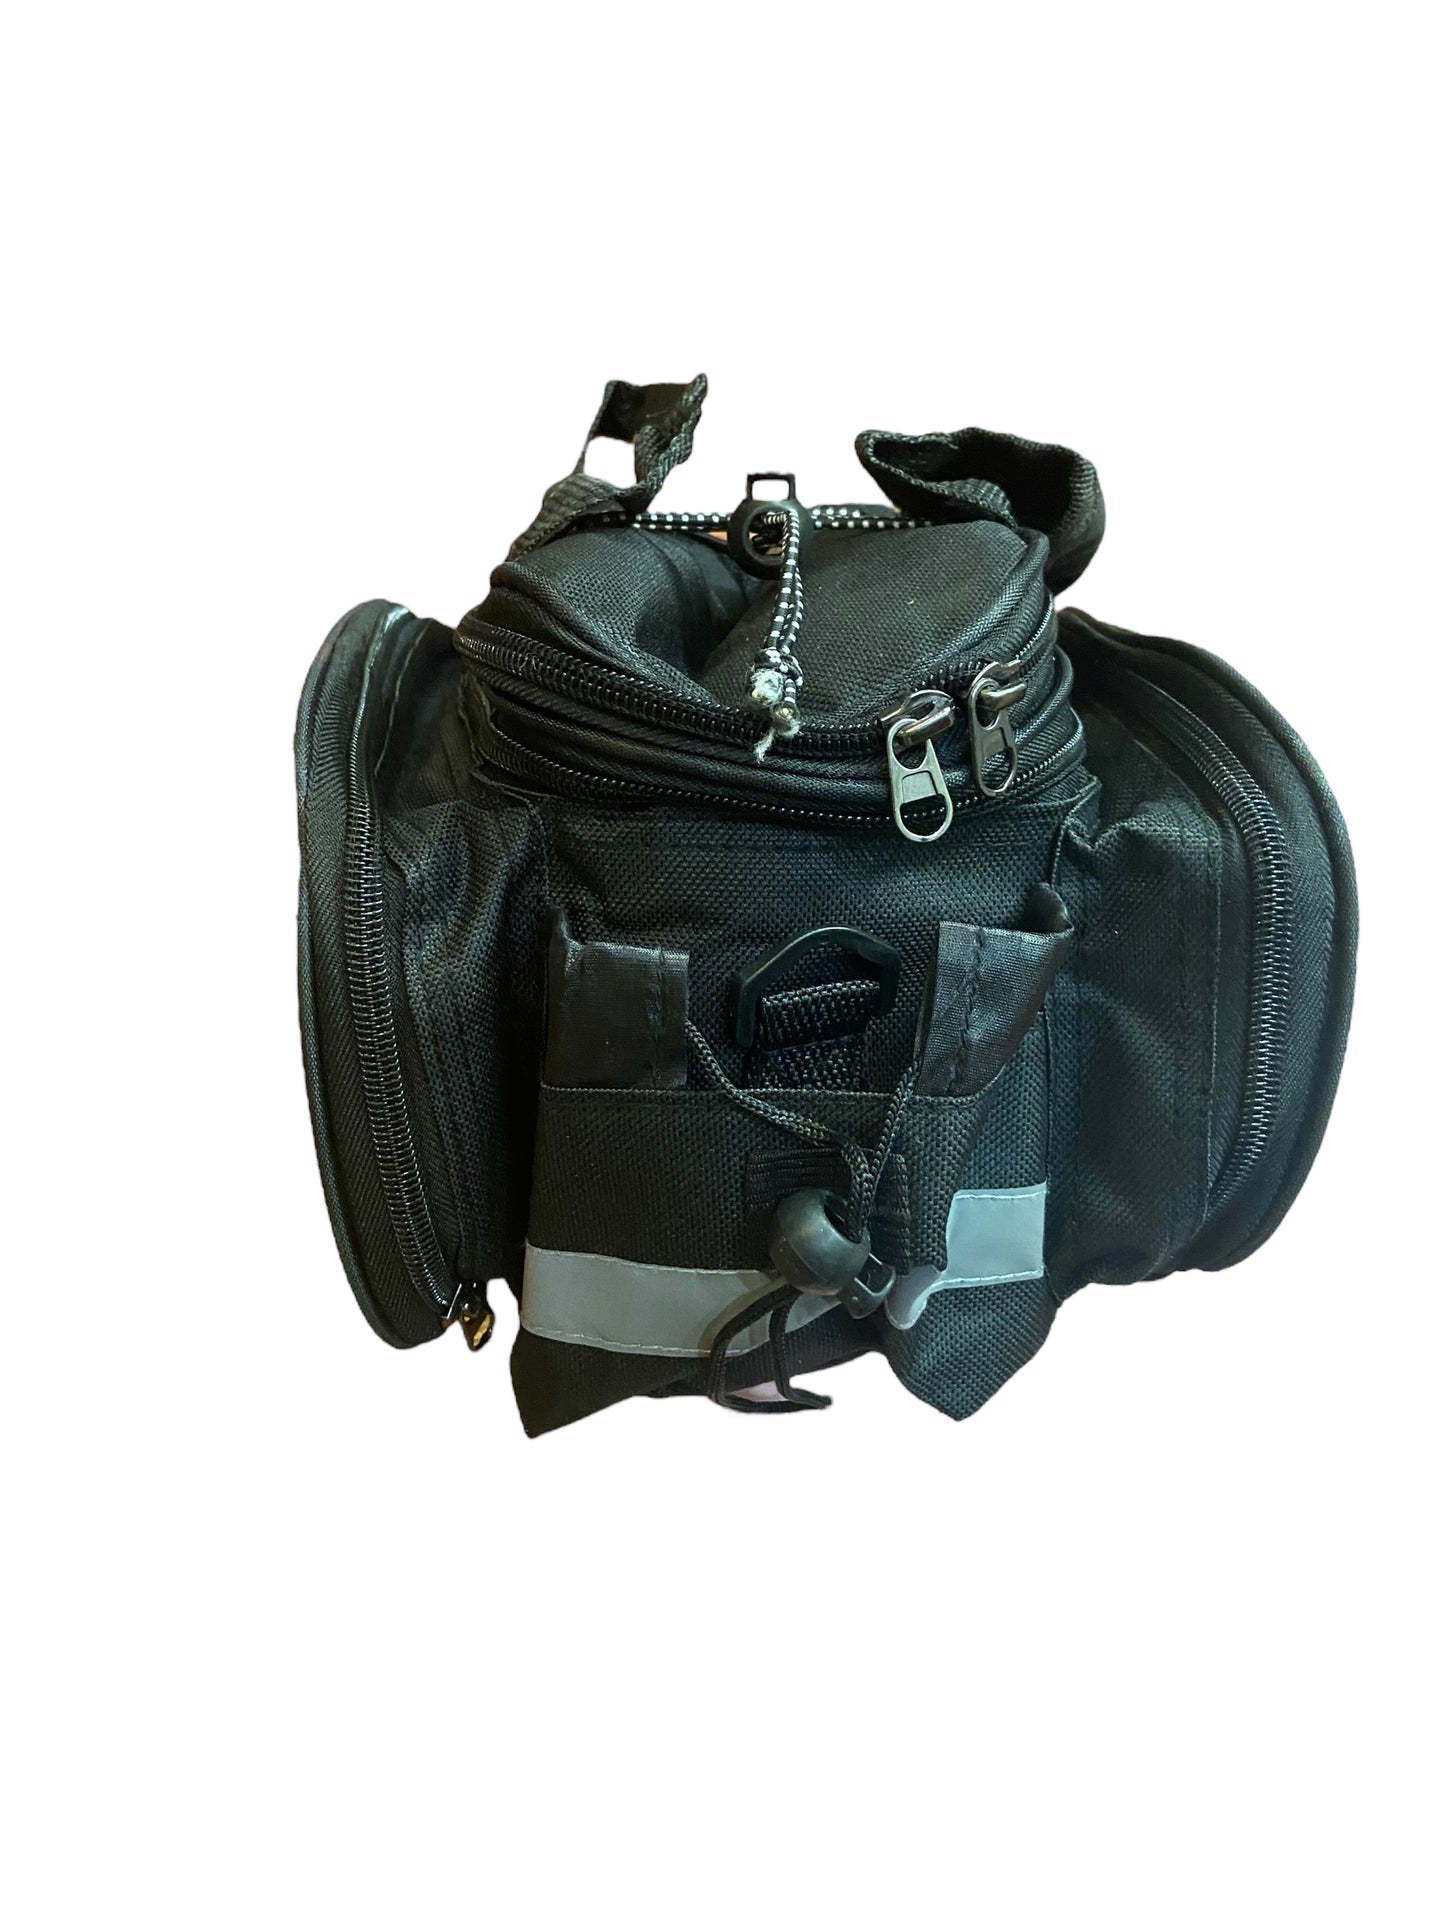 BICYCLE BAG REMOVABLE CARRIER FOR REAR RACK